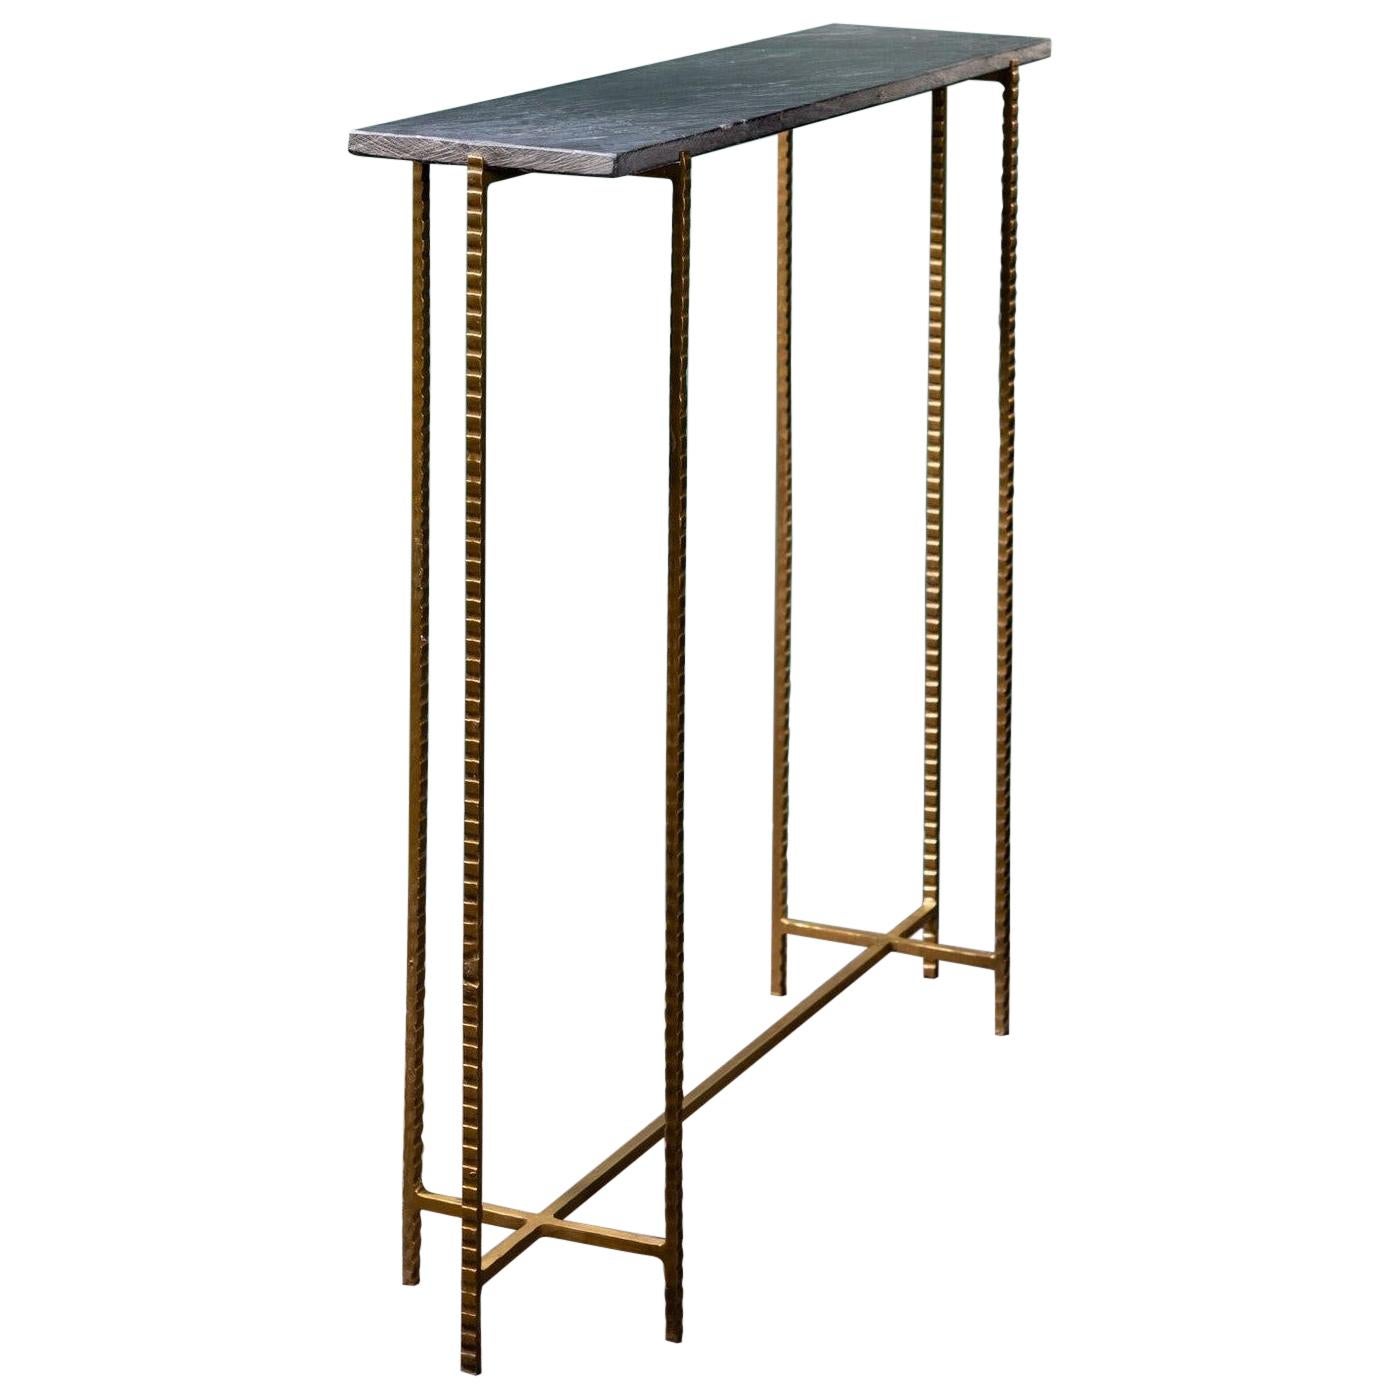 1960s-1970s Design Black Marble And Brass Console Table